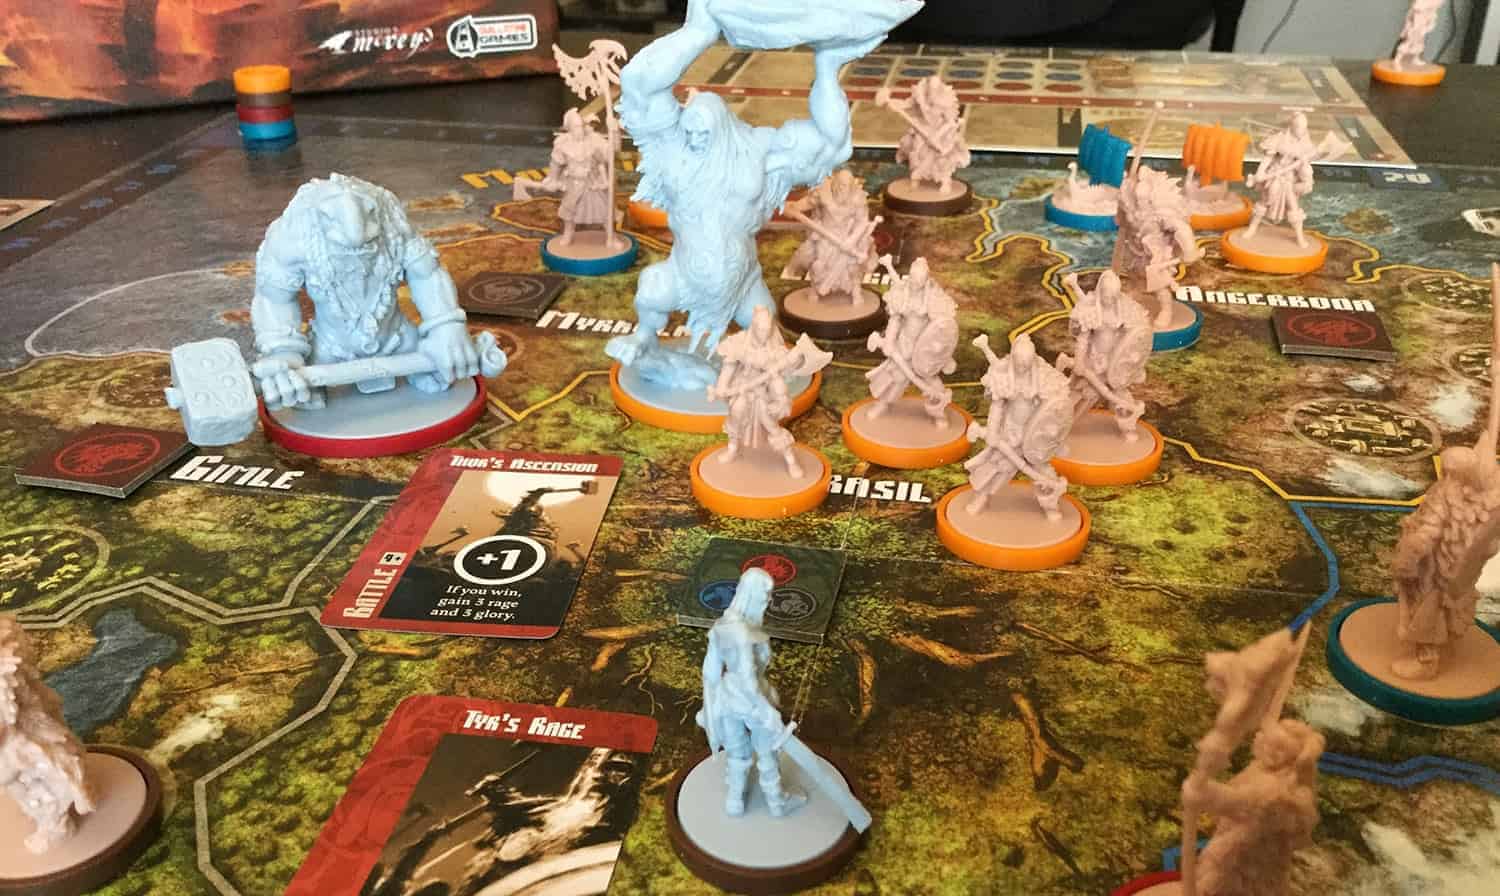 Blood Rage comes with one of the best fantasy board game miniatures around!